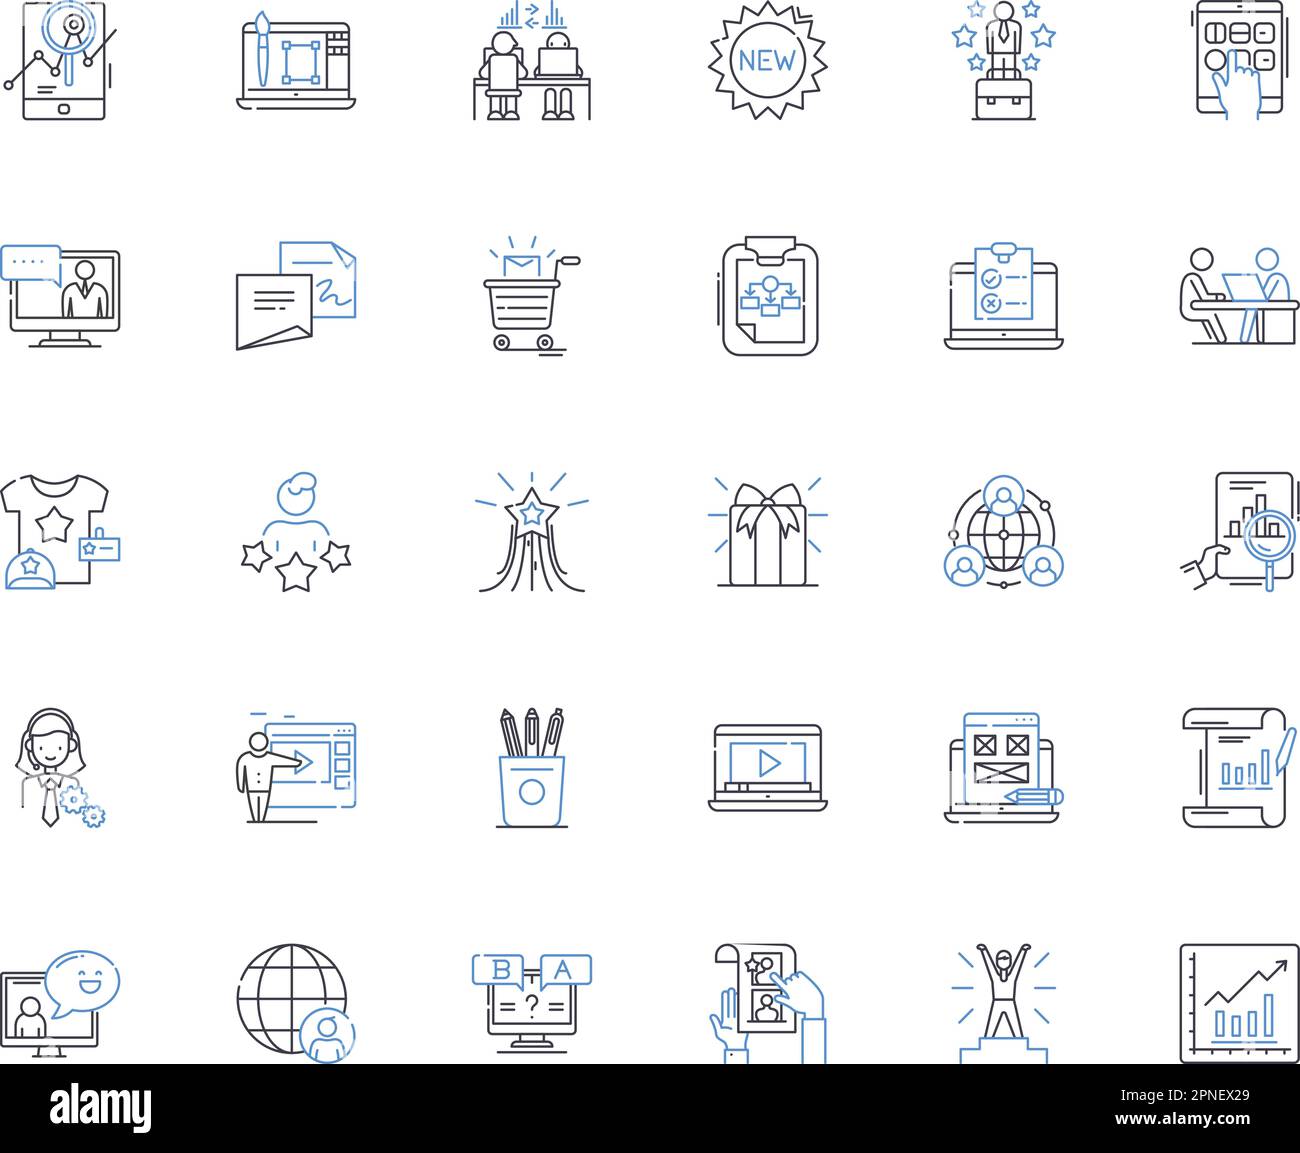 Marketing strategy line icons collection. Segmentation, Targeting, Positioning, Differentiation, Branding, Promotion, Communication vector and linear Stock Vector